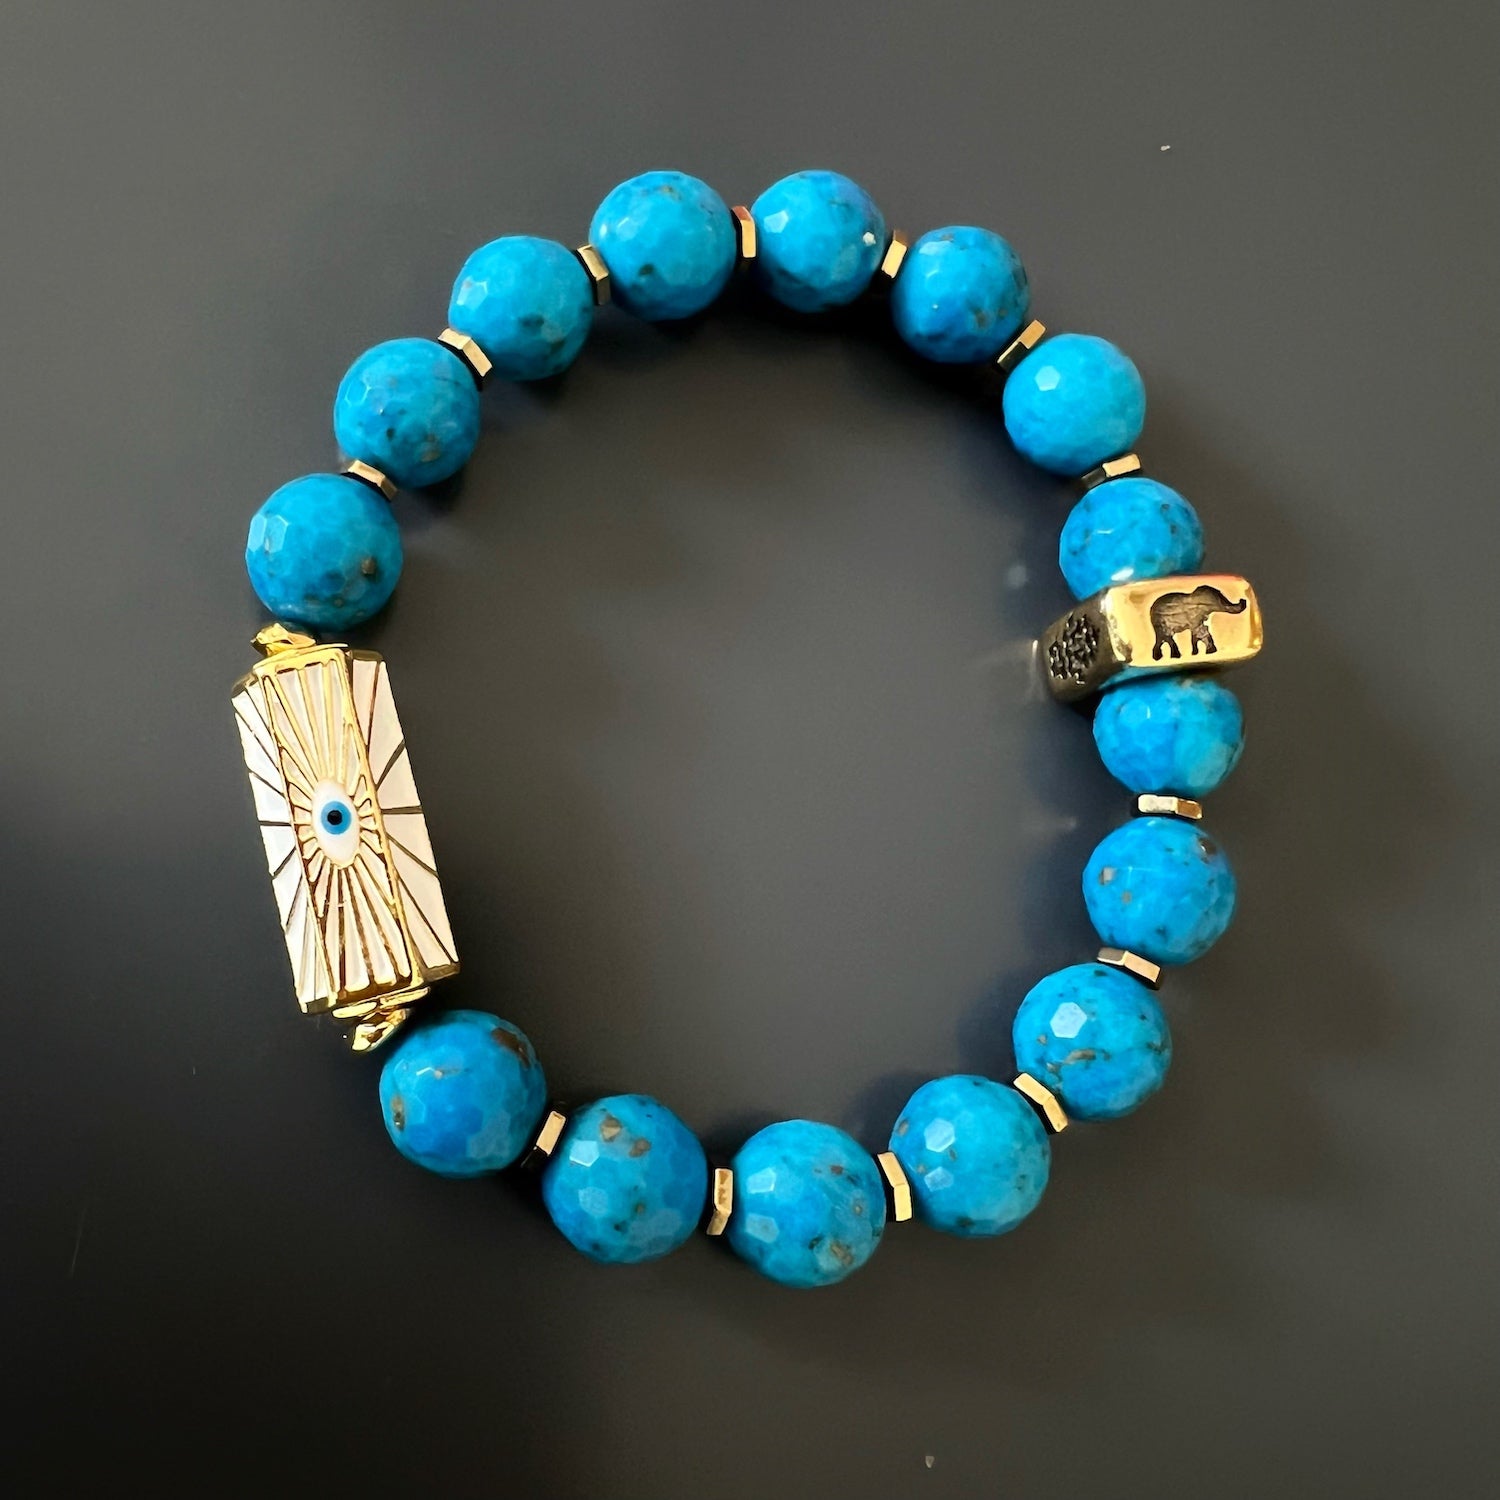 Elevate your style and attract positive energies with the Turquoise Luck and Protection Bracelet, a meaningful and elegant accessory.